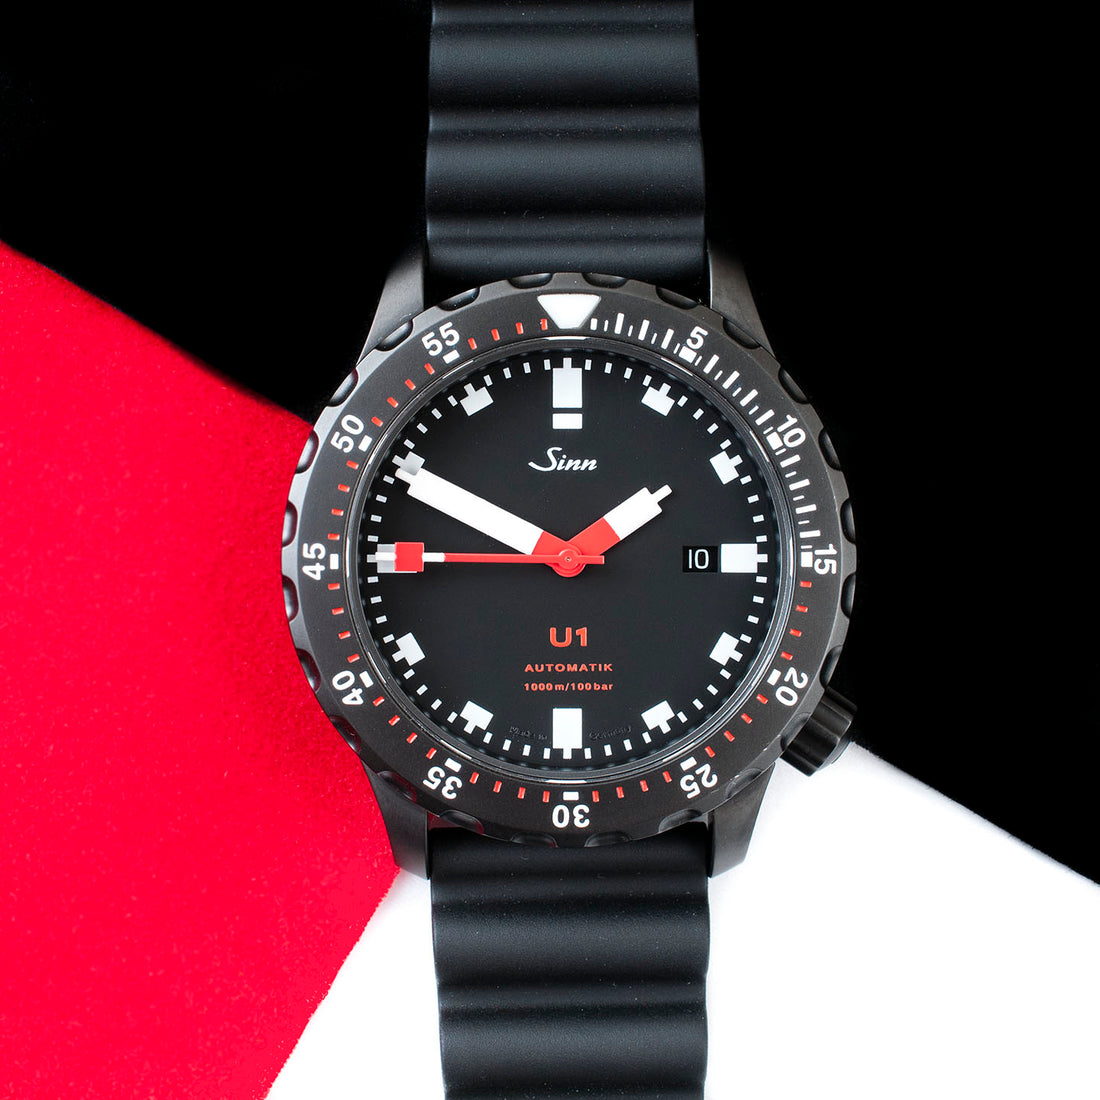 Why the Sinn U1 S Is the Best Diving Watch Available. Trust Me, I’m an Expert - 1010.020 Watch Review